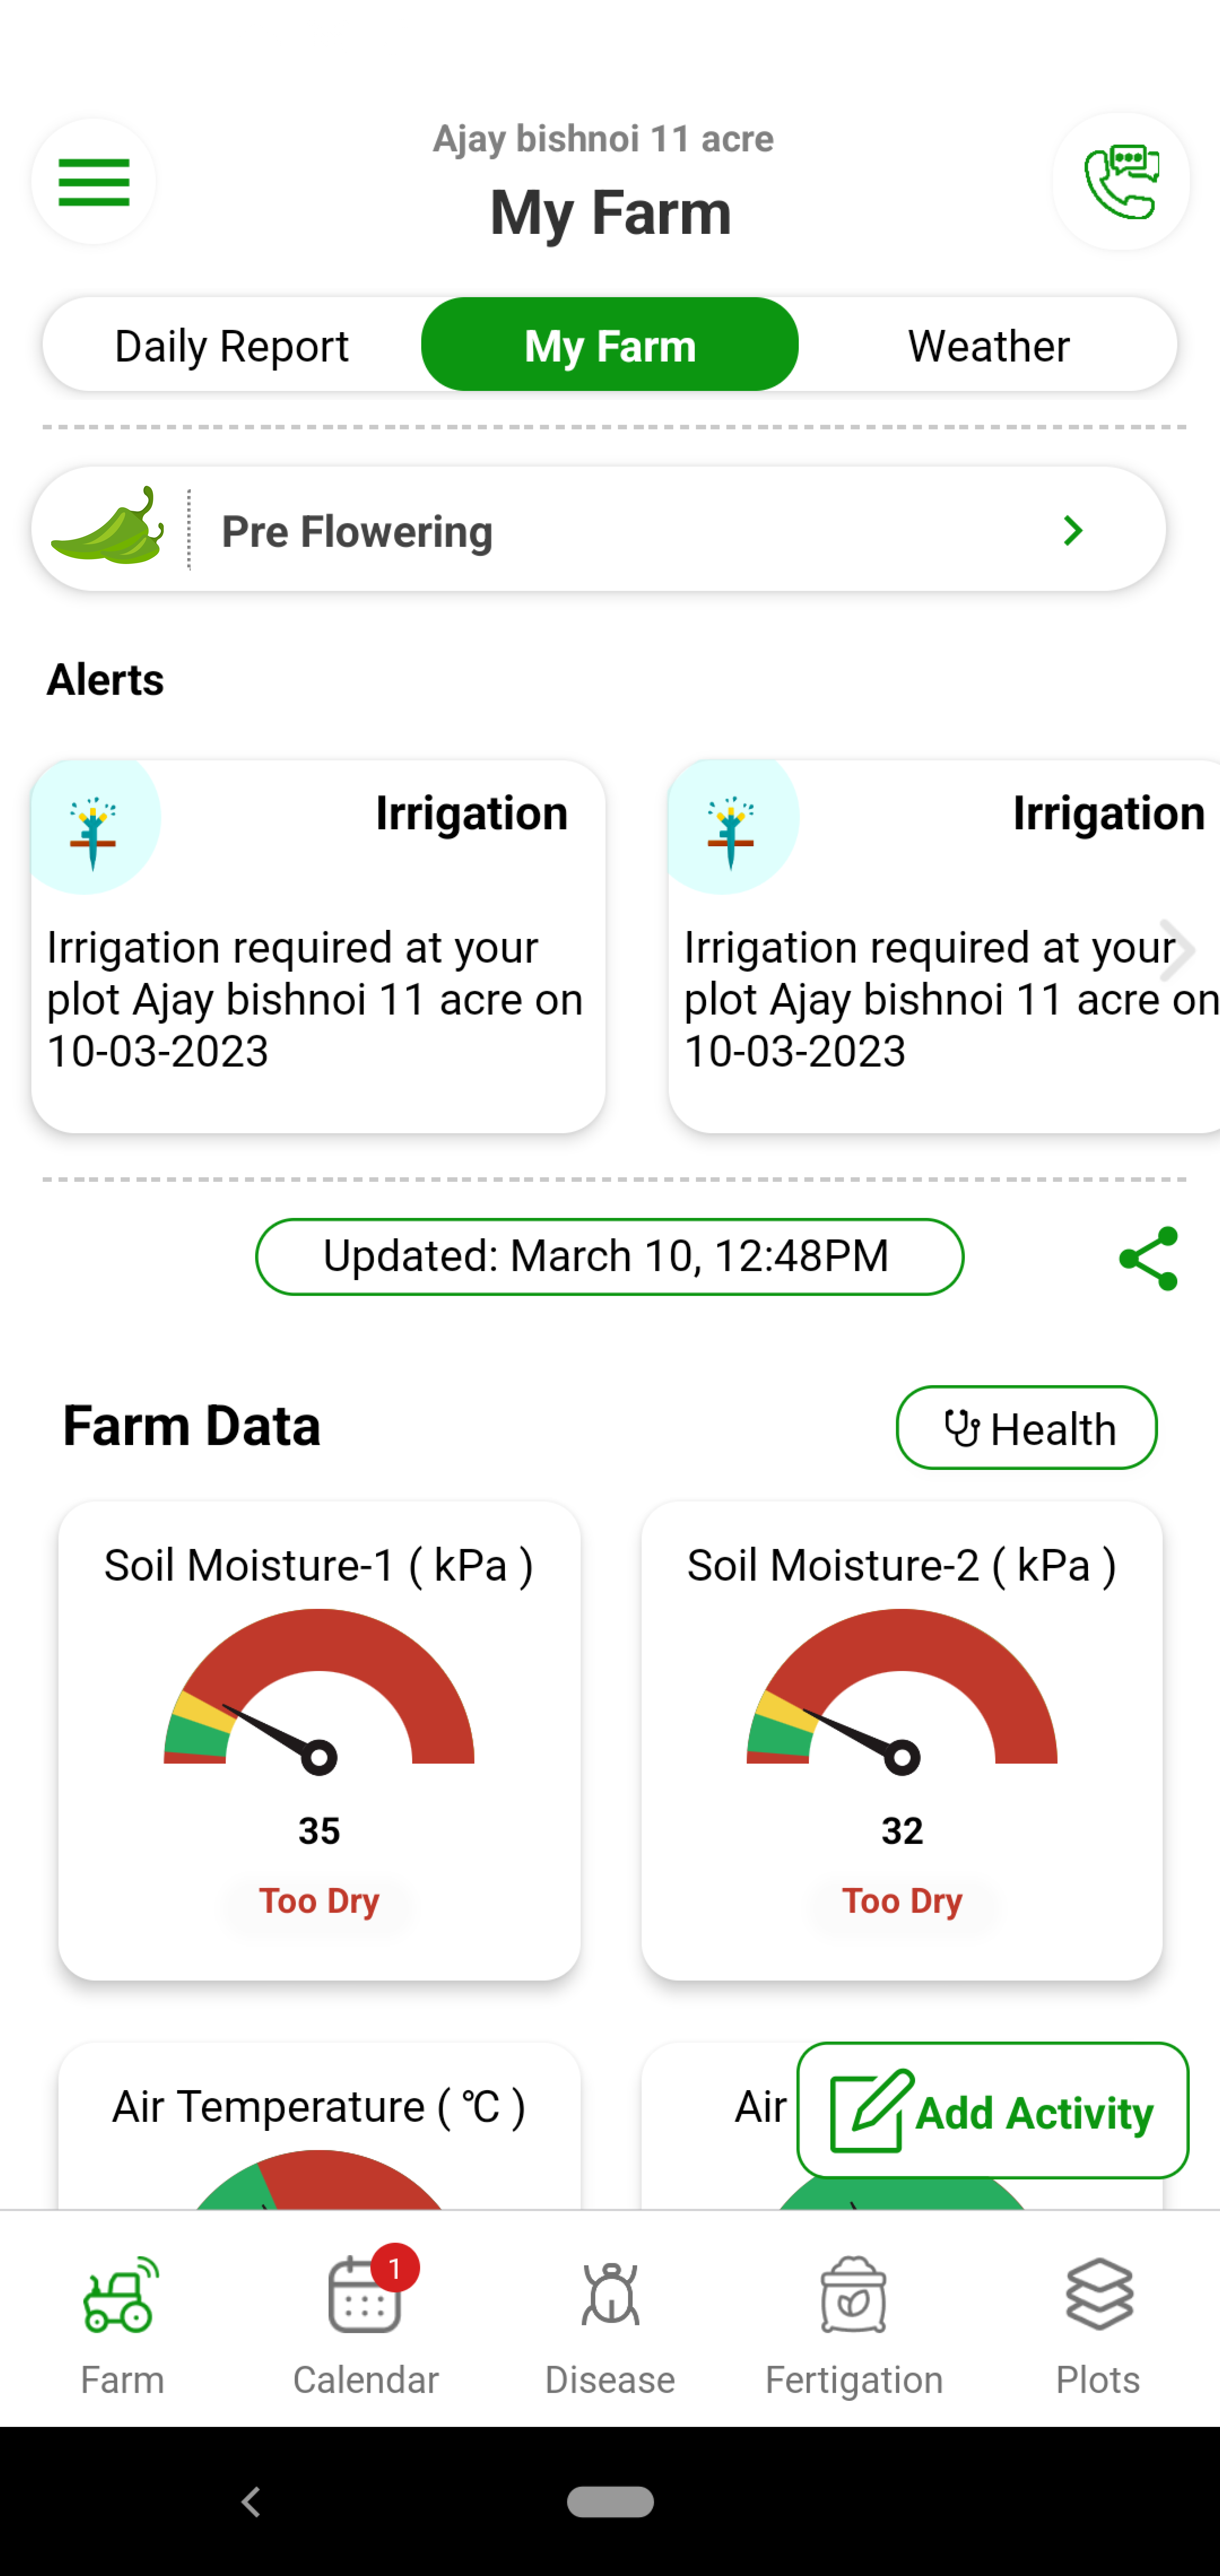 Too much water or too less water can be very harmful for chilli. Over irrigation leads to wilting in the plants. Chilli’s water requirements vary based on soil type and stage. With Fyllo’s device containing soil moisture and soil temperature sensor and intelligent software, you get alerts on how much water to provide to the crop. You can also see and visualize evapotranspiration (Etc) values of the crop. You can perfectly manage the water requirements to get the perfect size, color and sugar.